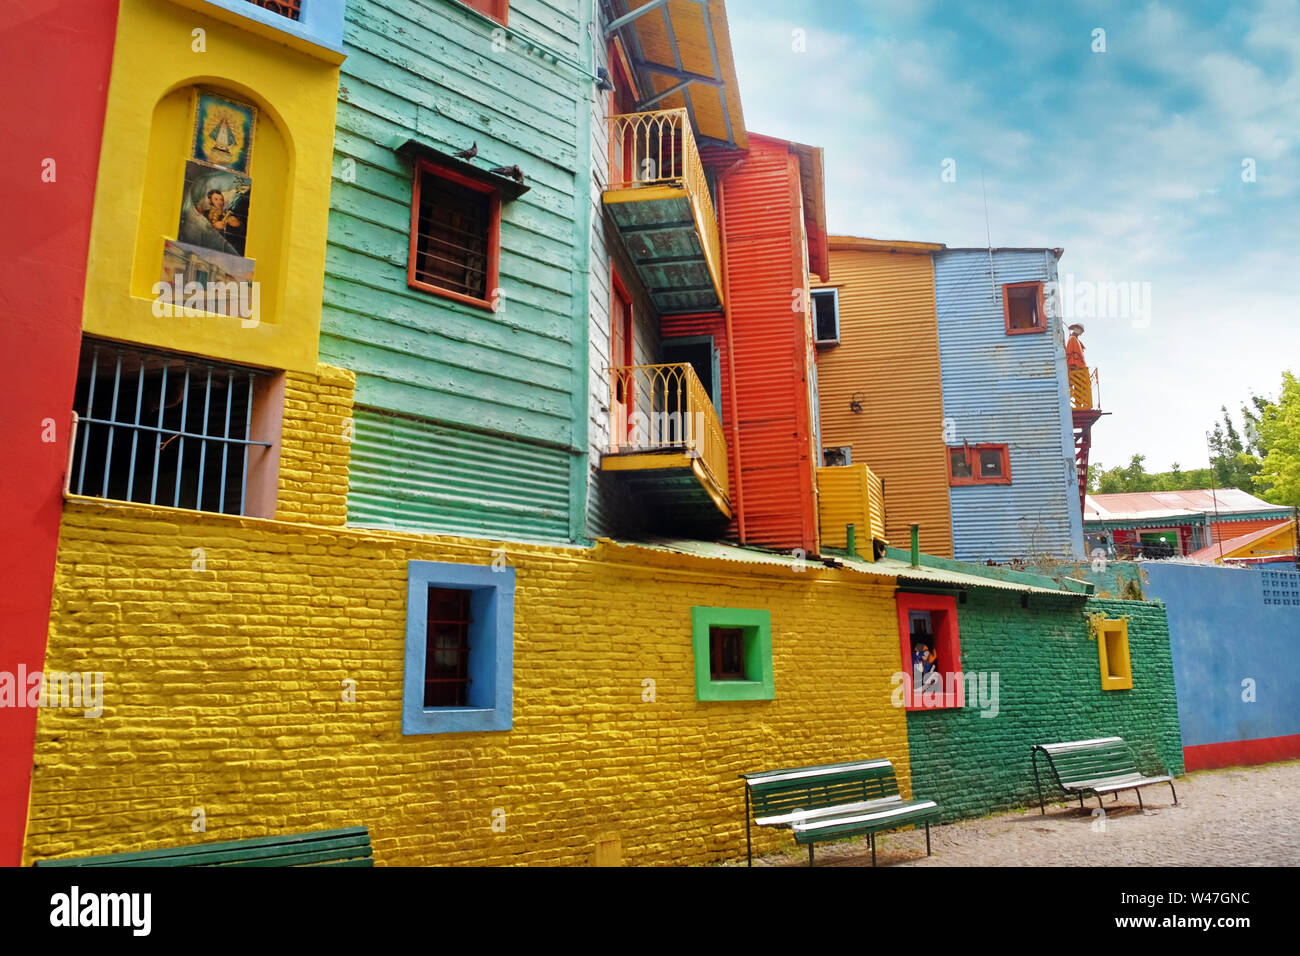 View of colorful buildings in Caminito of the Argentinean district La Boca, in Buenos Aires, with vintage walls against a blue sky. Stock Photo